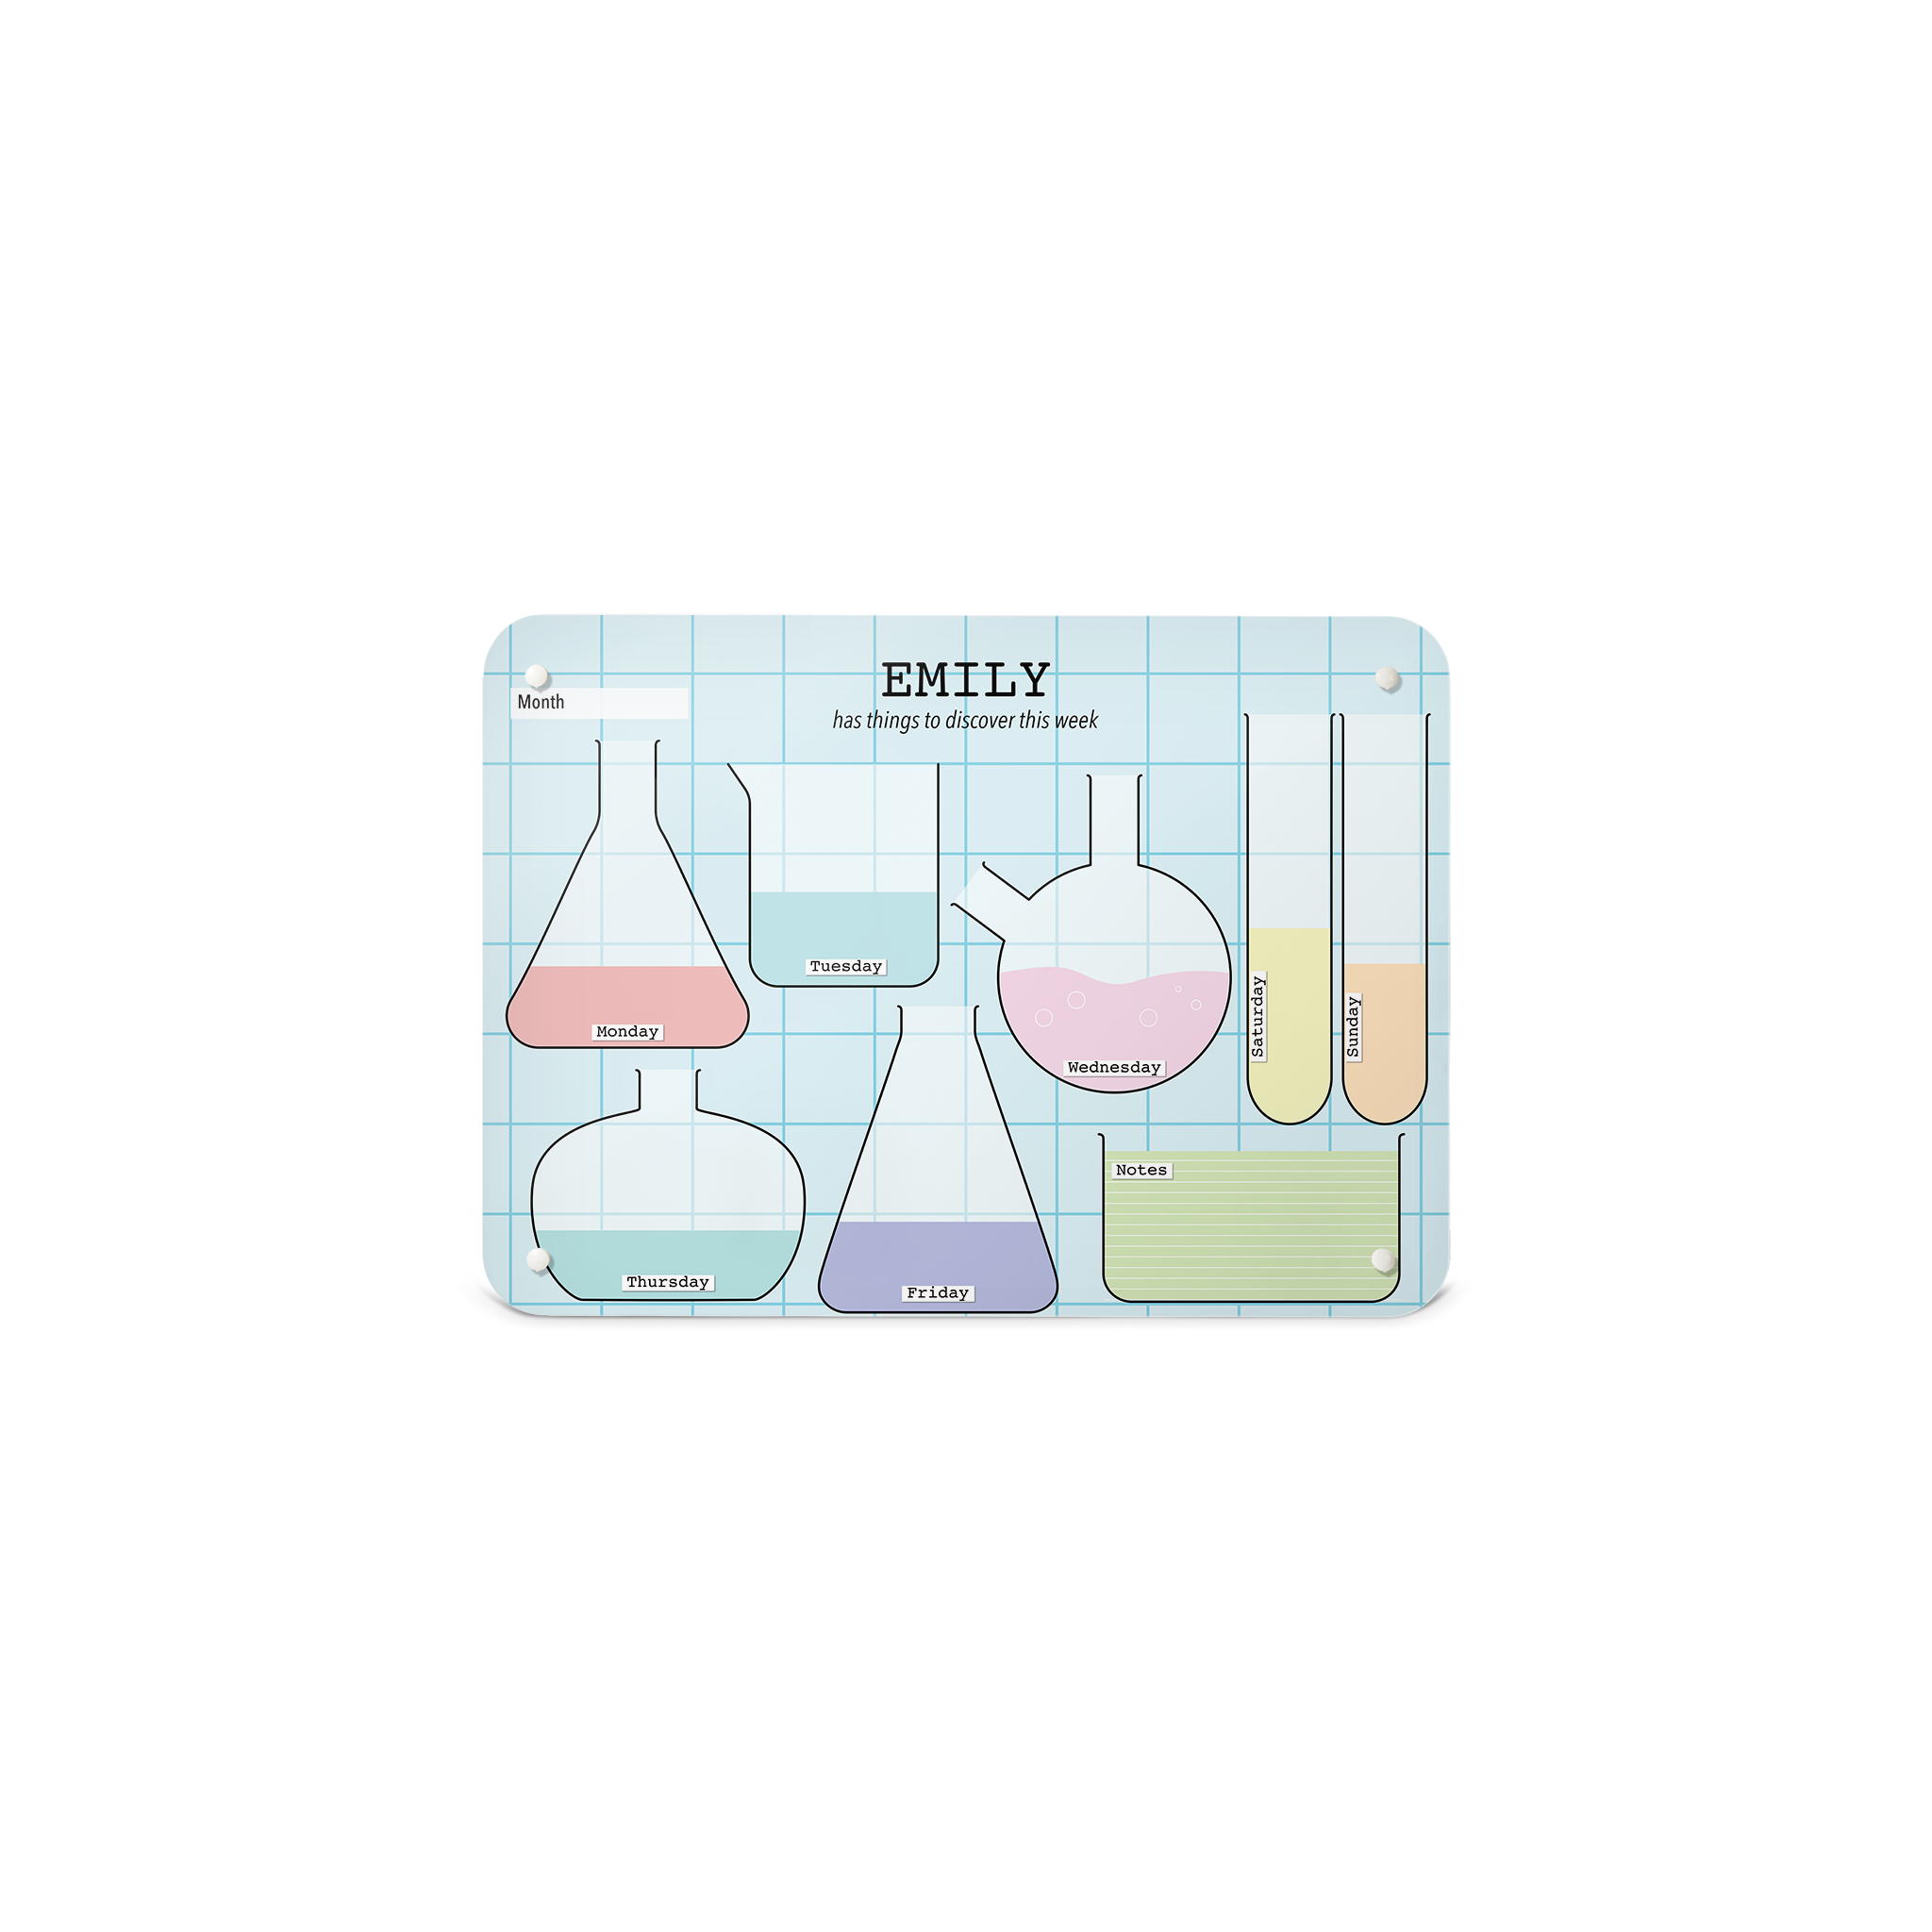 A small landscape science lab weekly planner magnetic notice board by Beyond the Fridge personalised with a name 